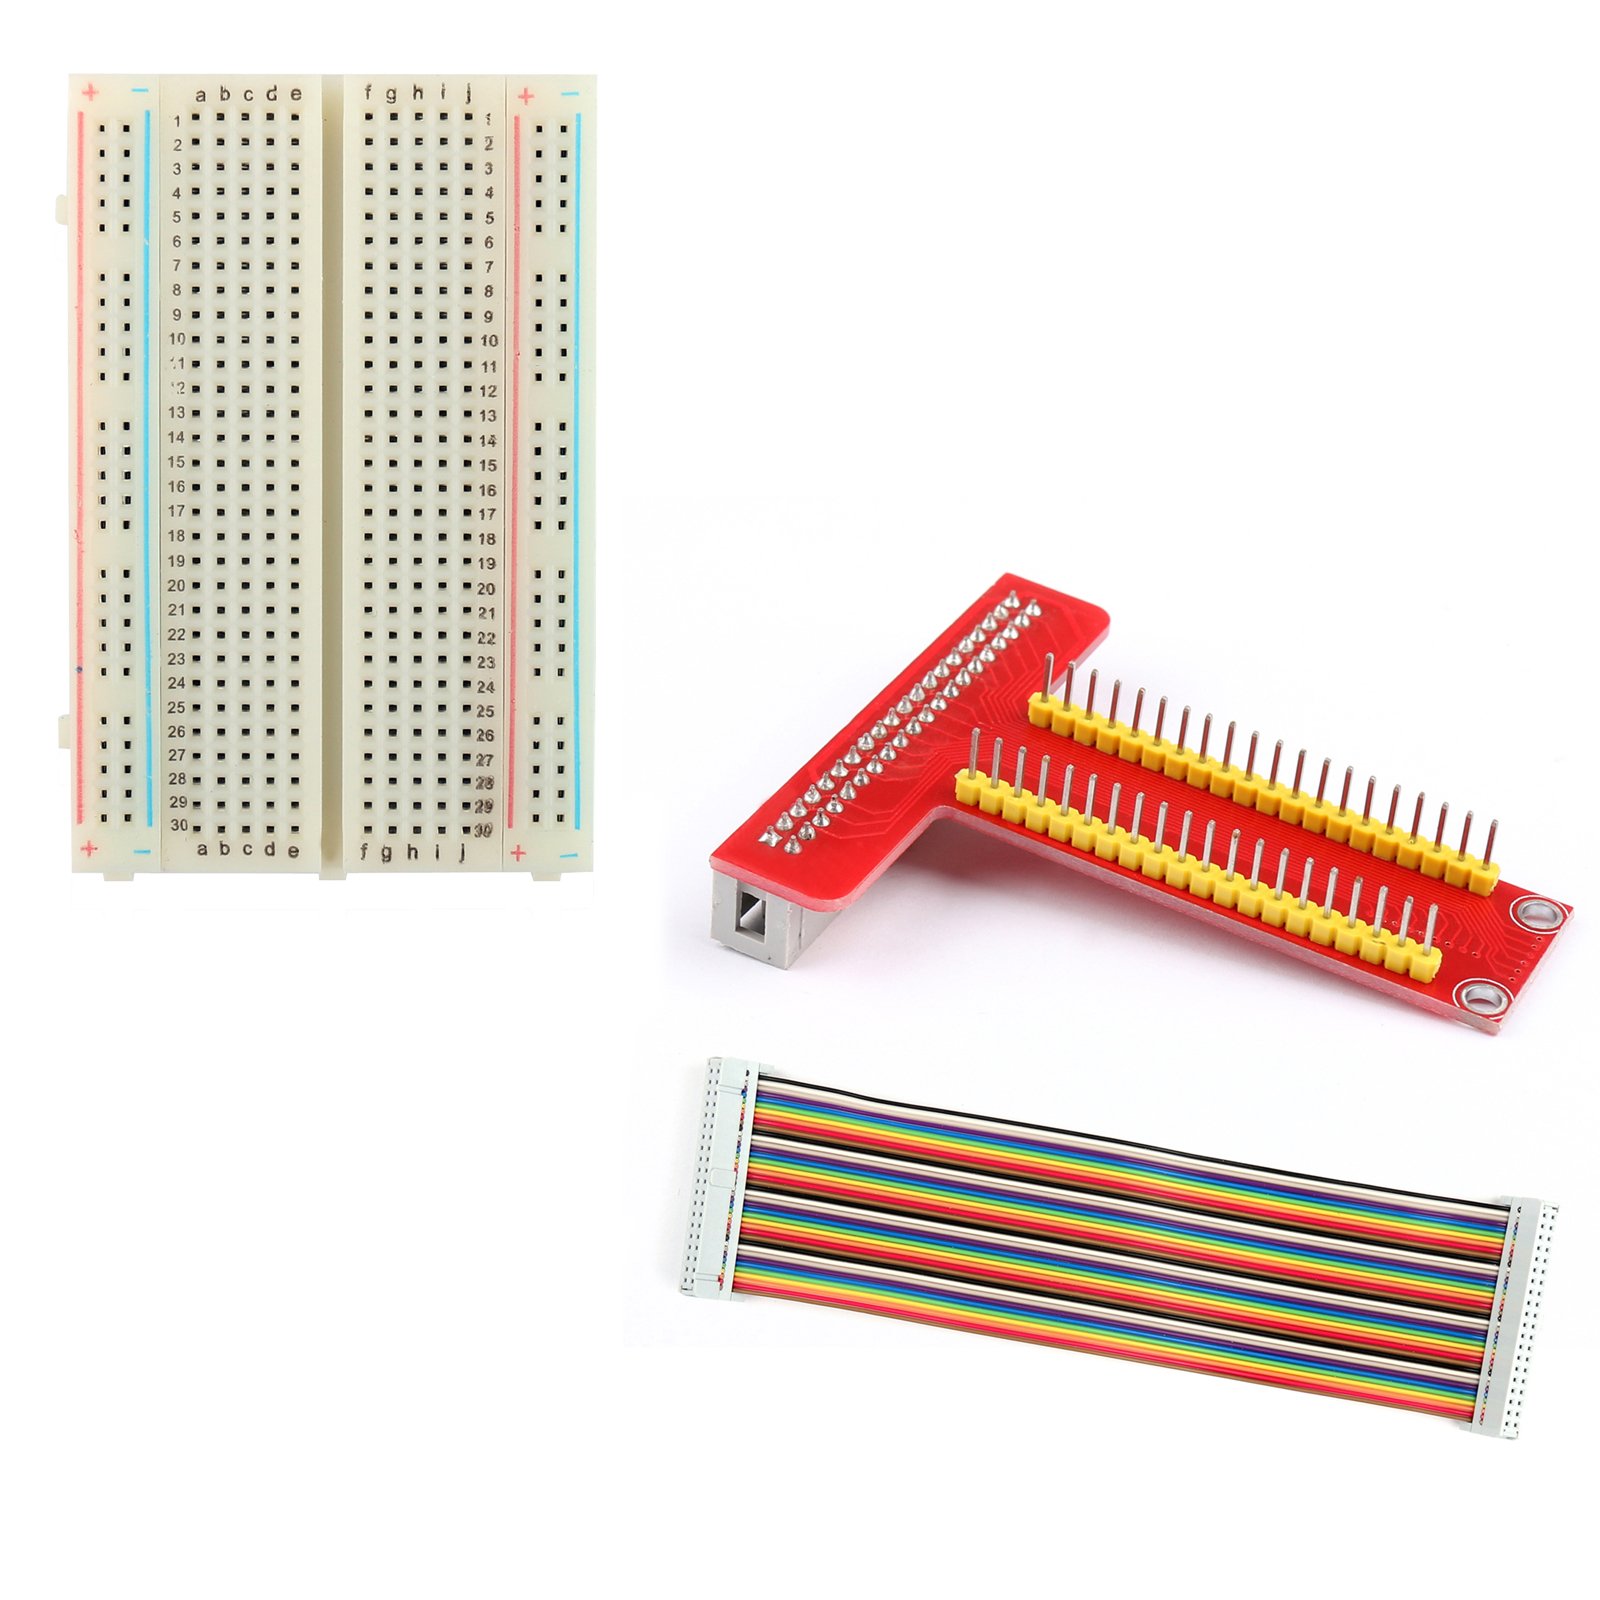 T Type Gpio Breakout Board With 40 Pin Cable And 400 Holes Breadboard For Raspberry Pi 3 2 Mode B